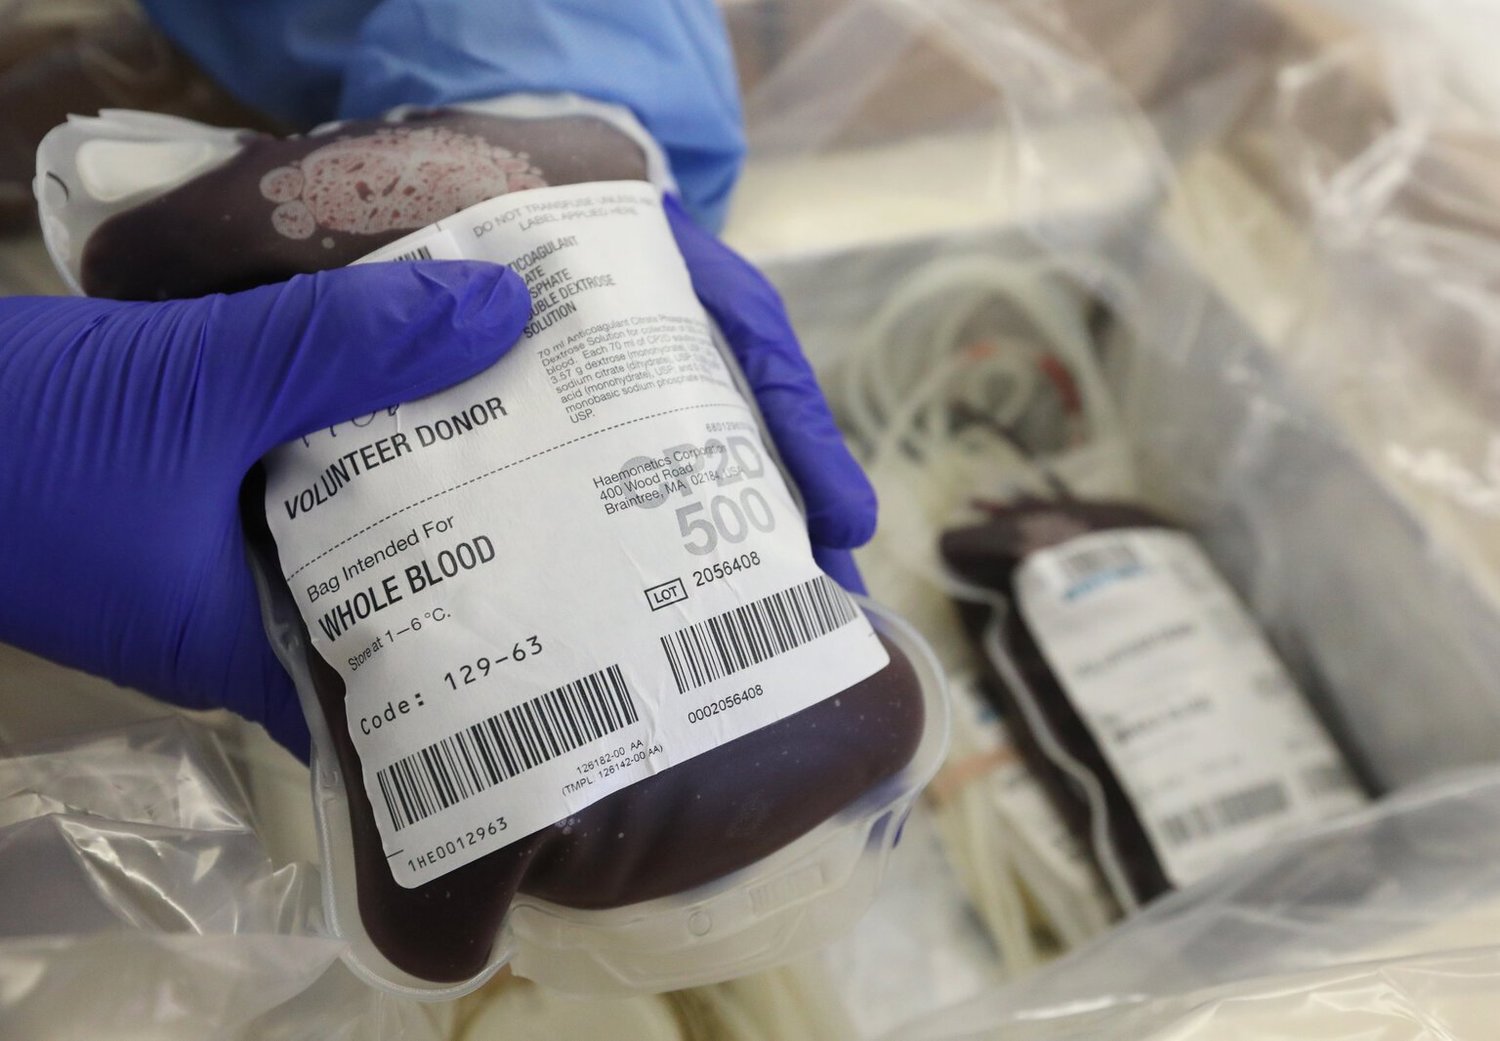 Donated blood is prepared to be shipped at Bloodworks Northwest, on Monday in Seattle. The region’s hospitals and trauma centers are experiencing a critical shortage in blood supply as donors have dropped off and more hospital operations resume.